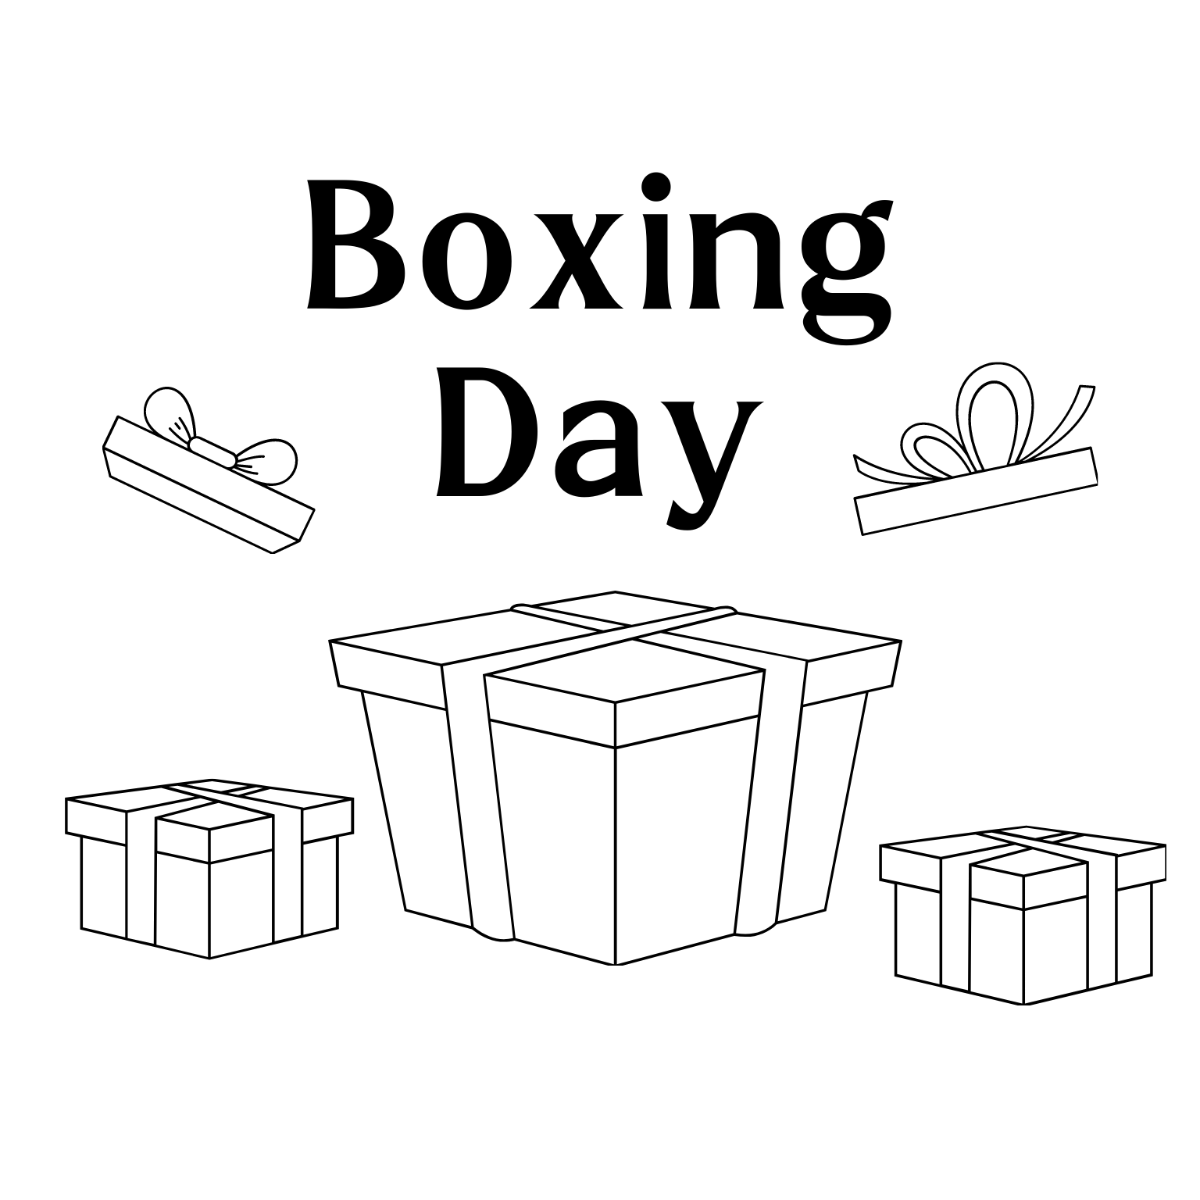 Boxing Day Drawing